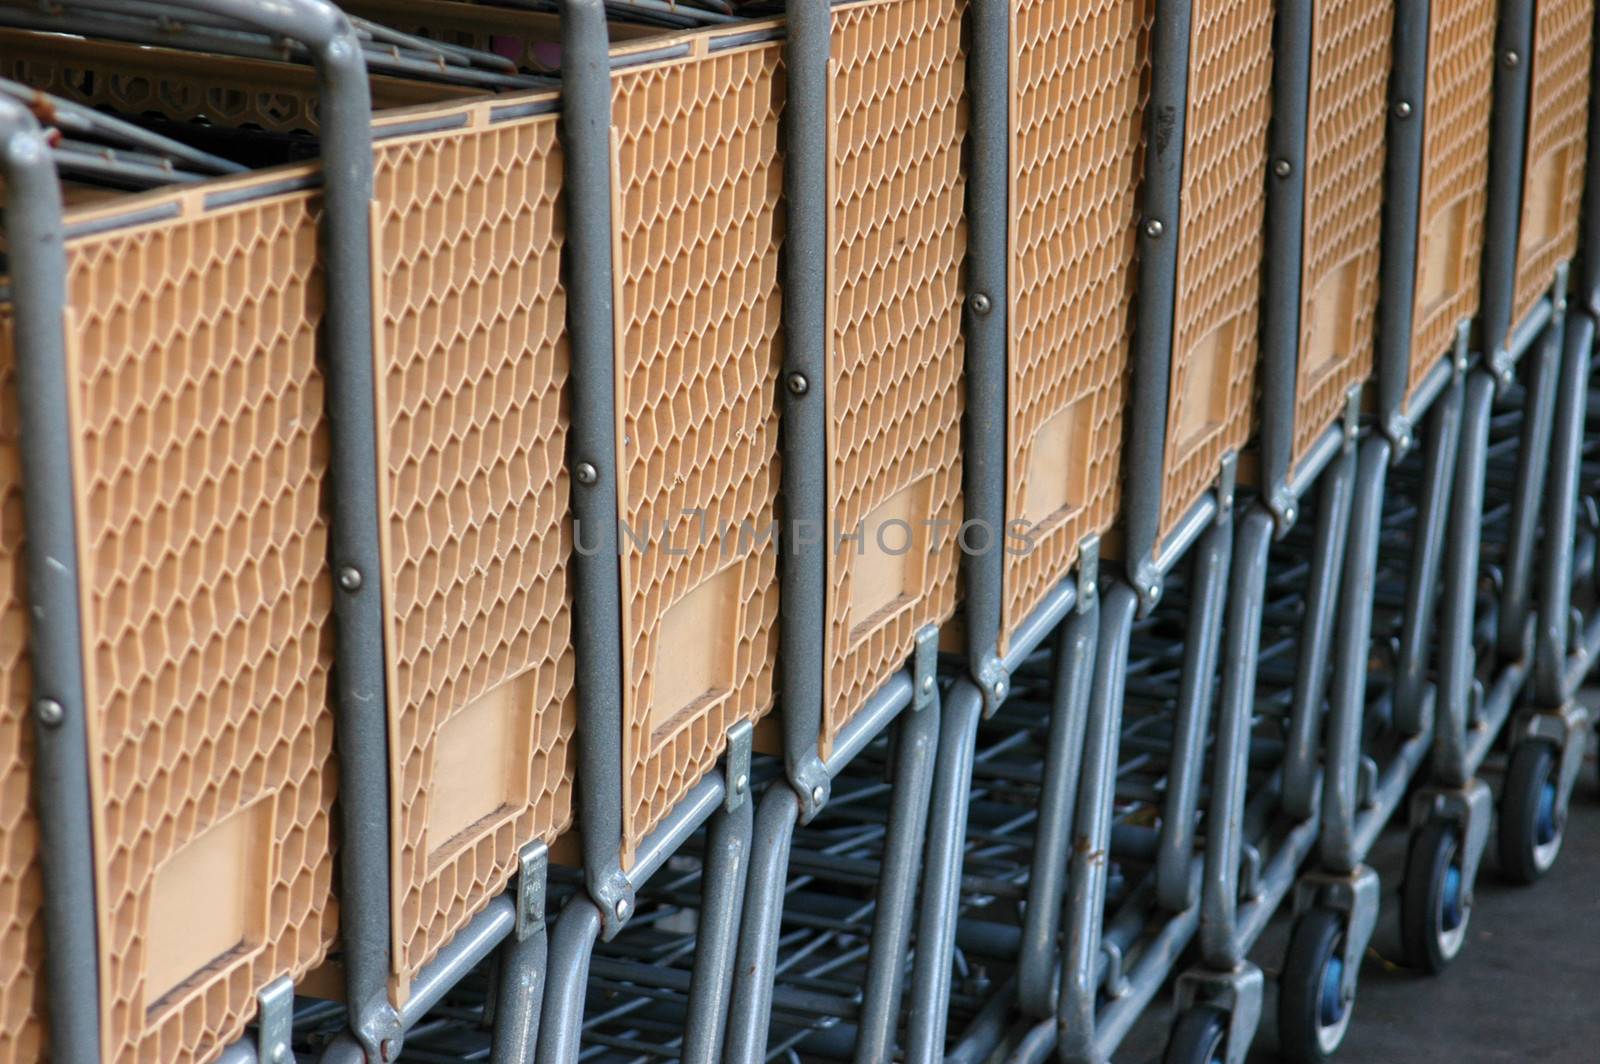 Retail image of a row of supermarket carts